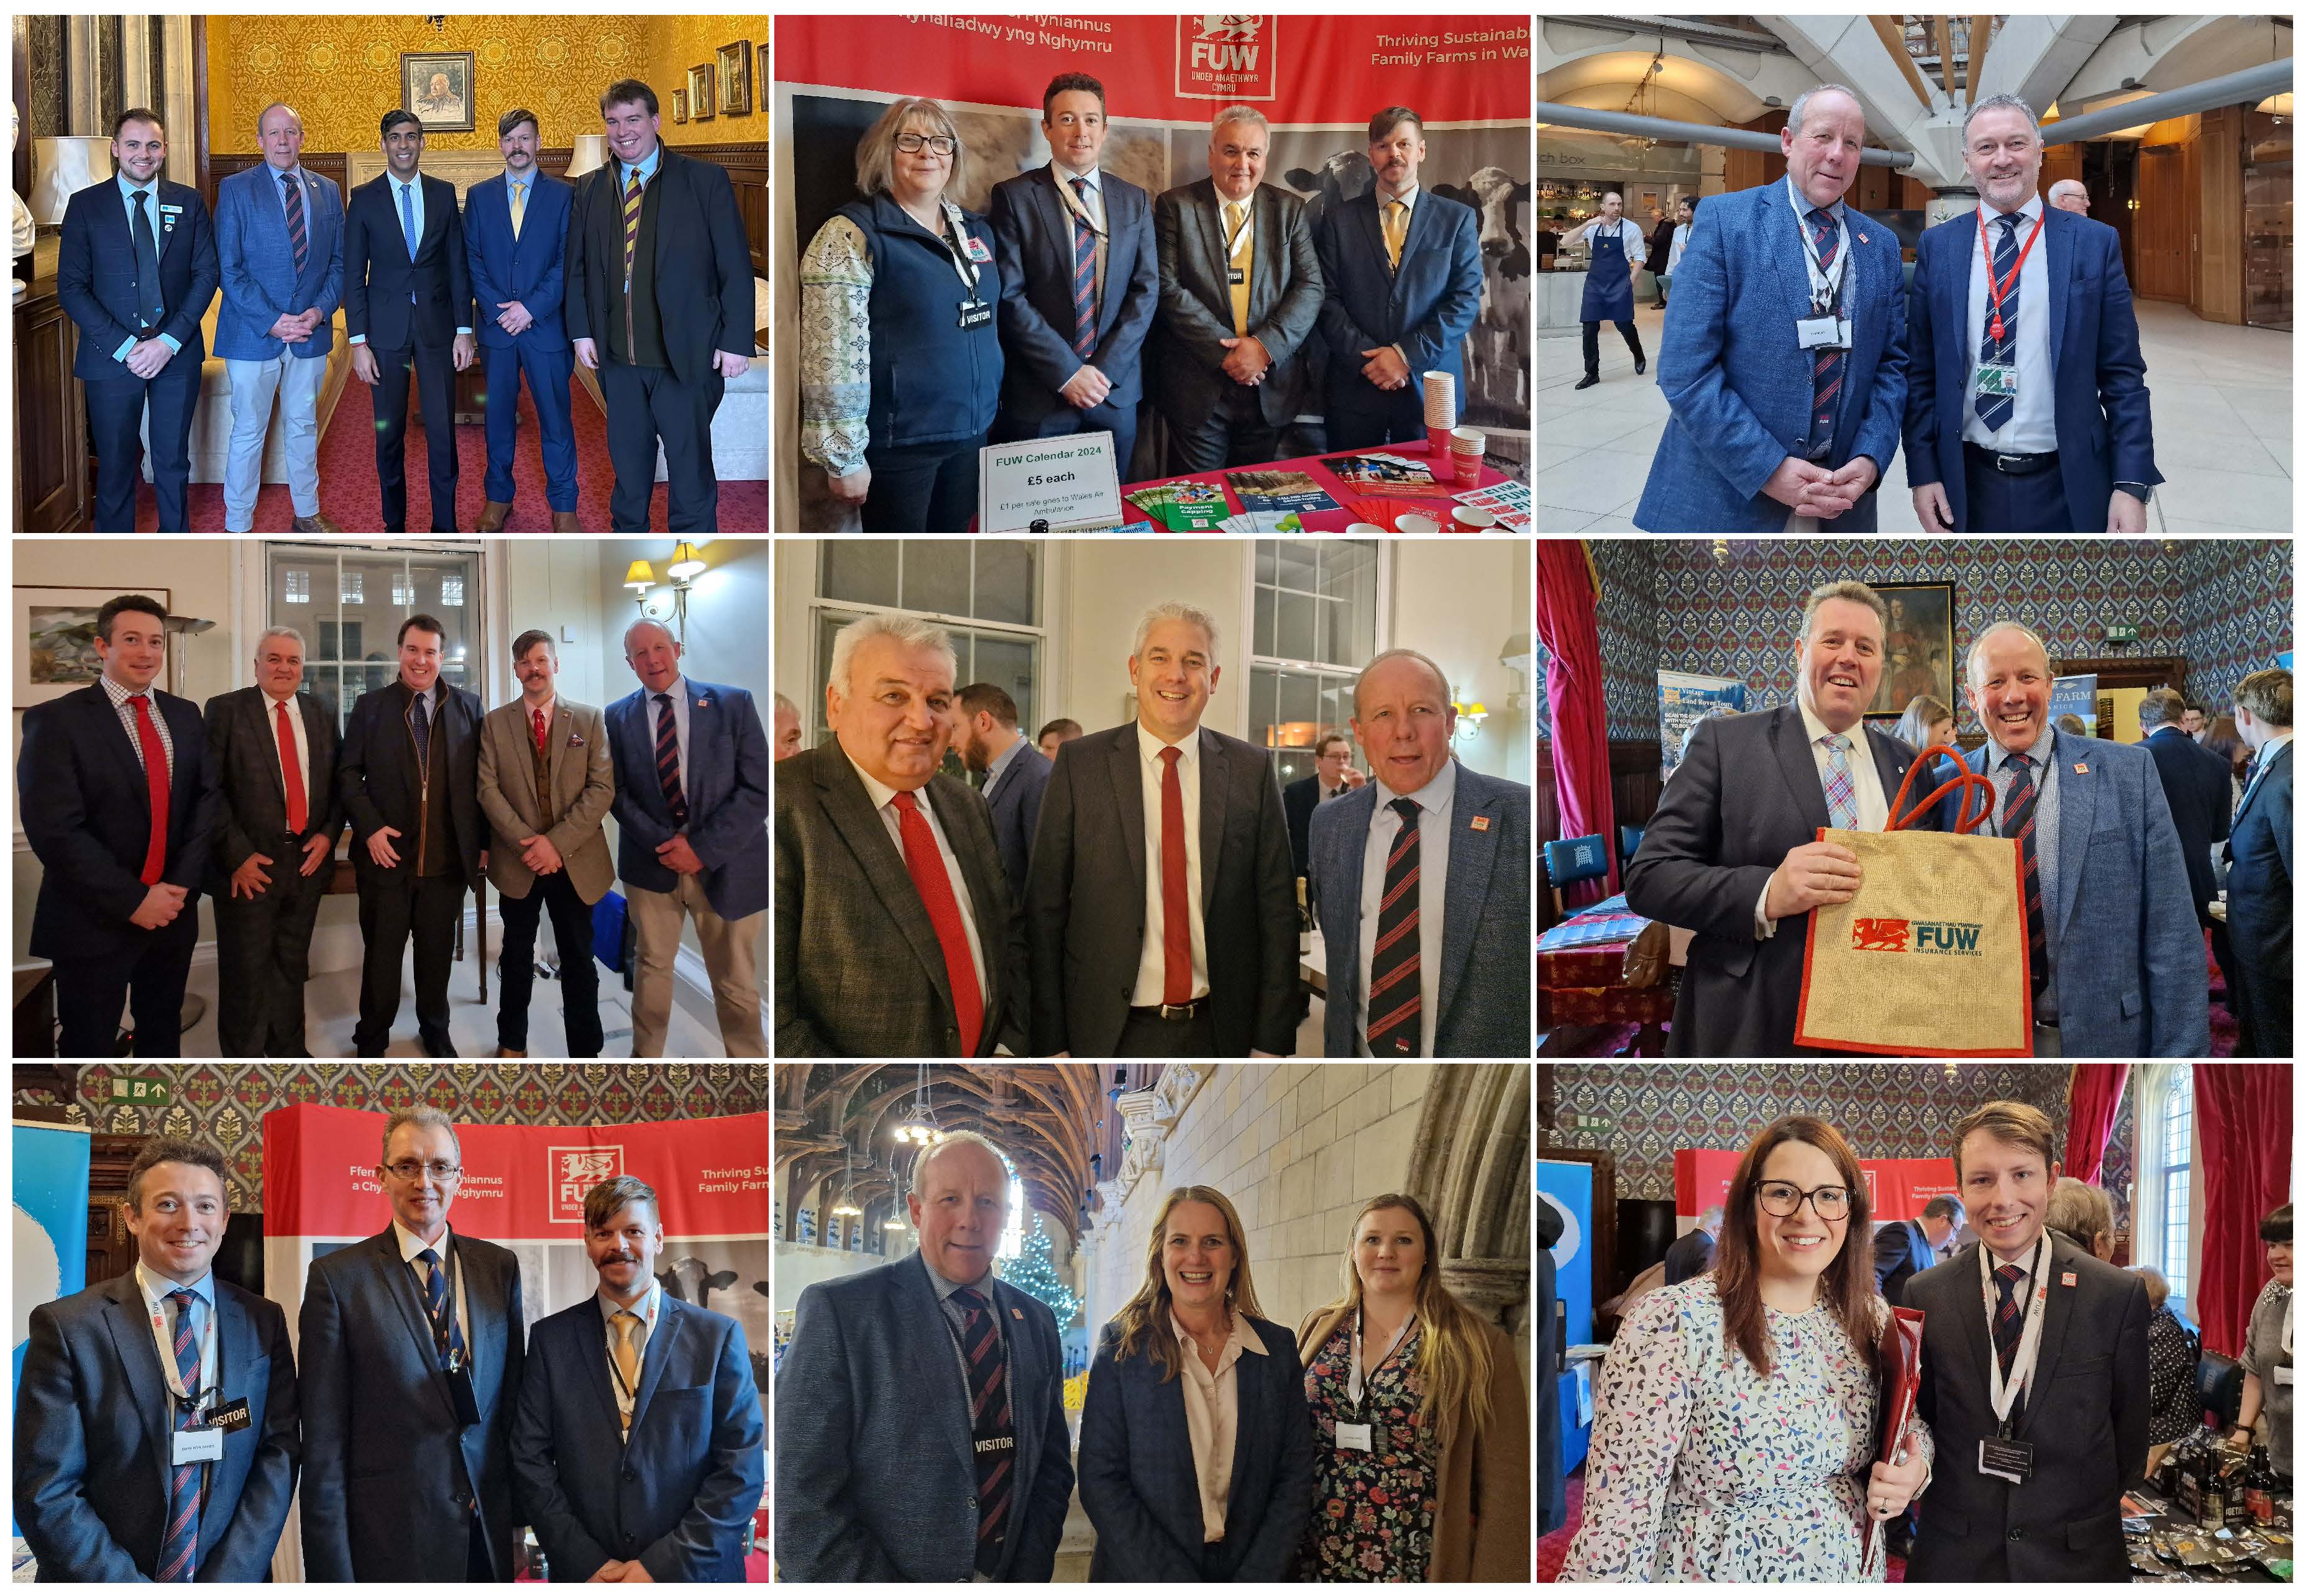 Taking the farming story to Westminster - FUW holds successful Montgomeryshire Day